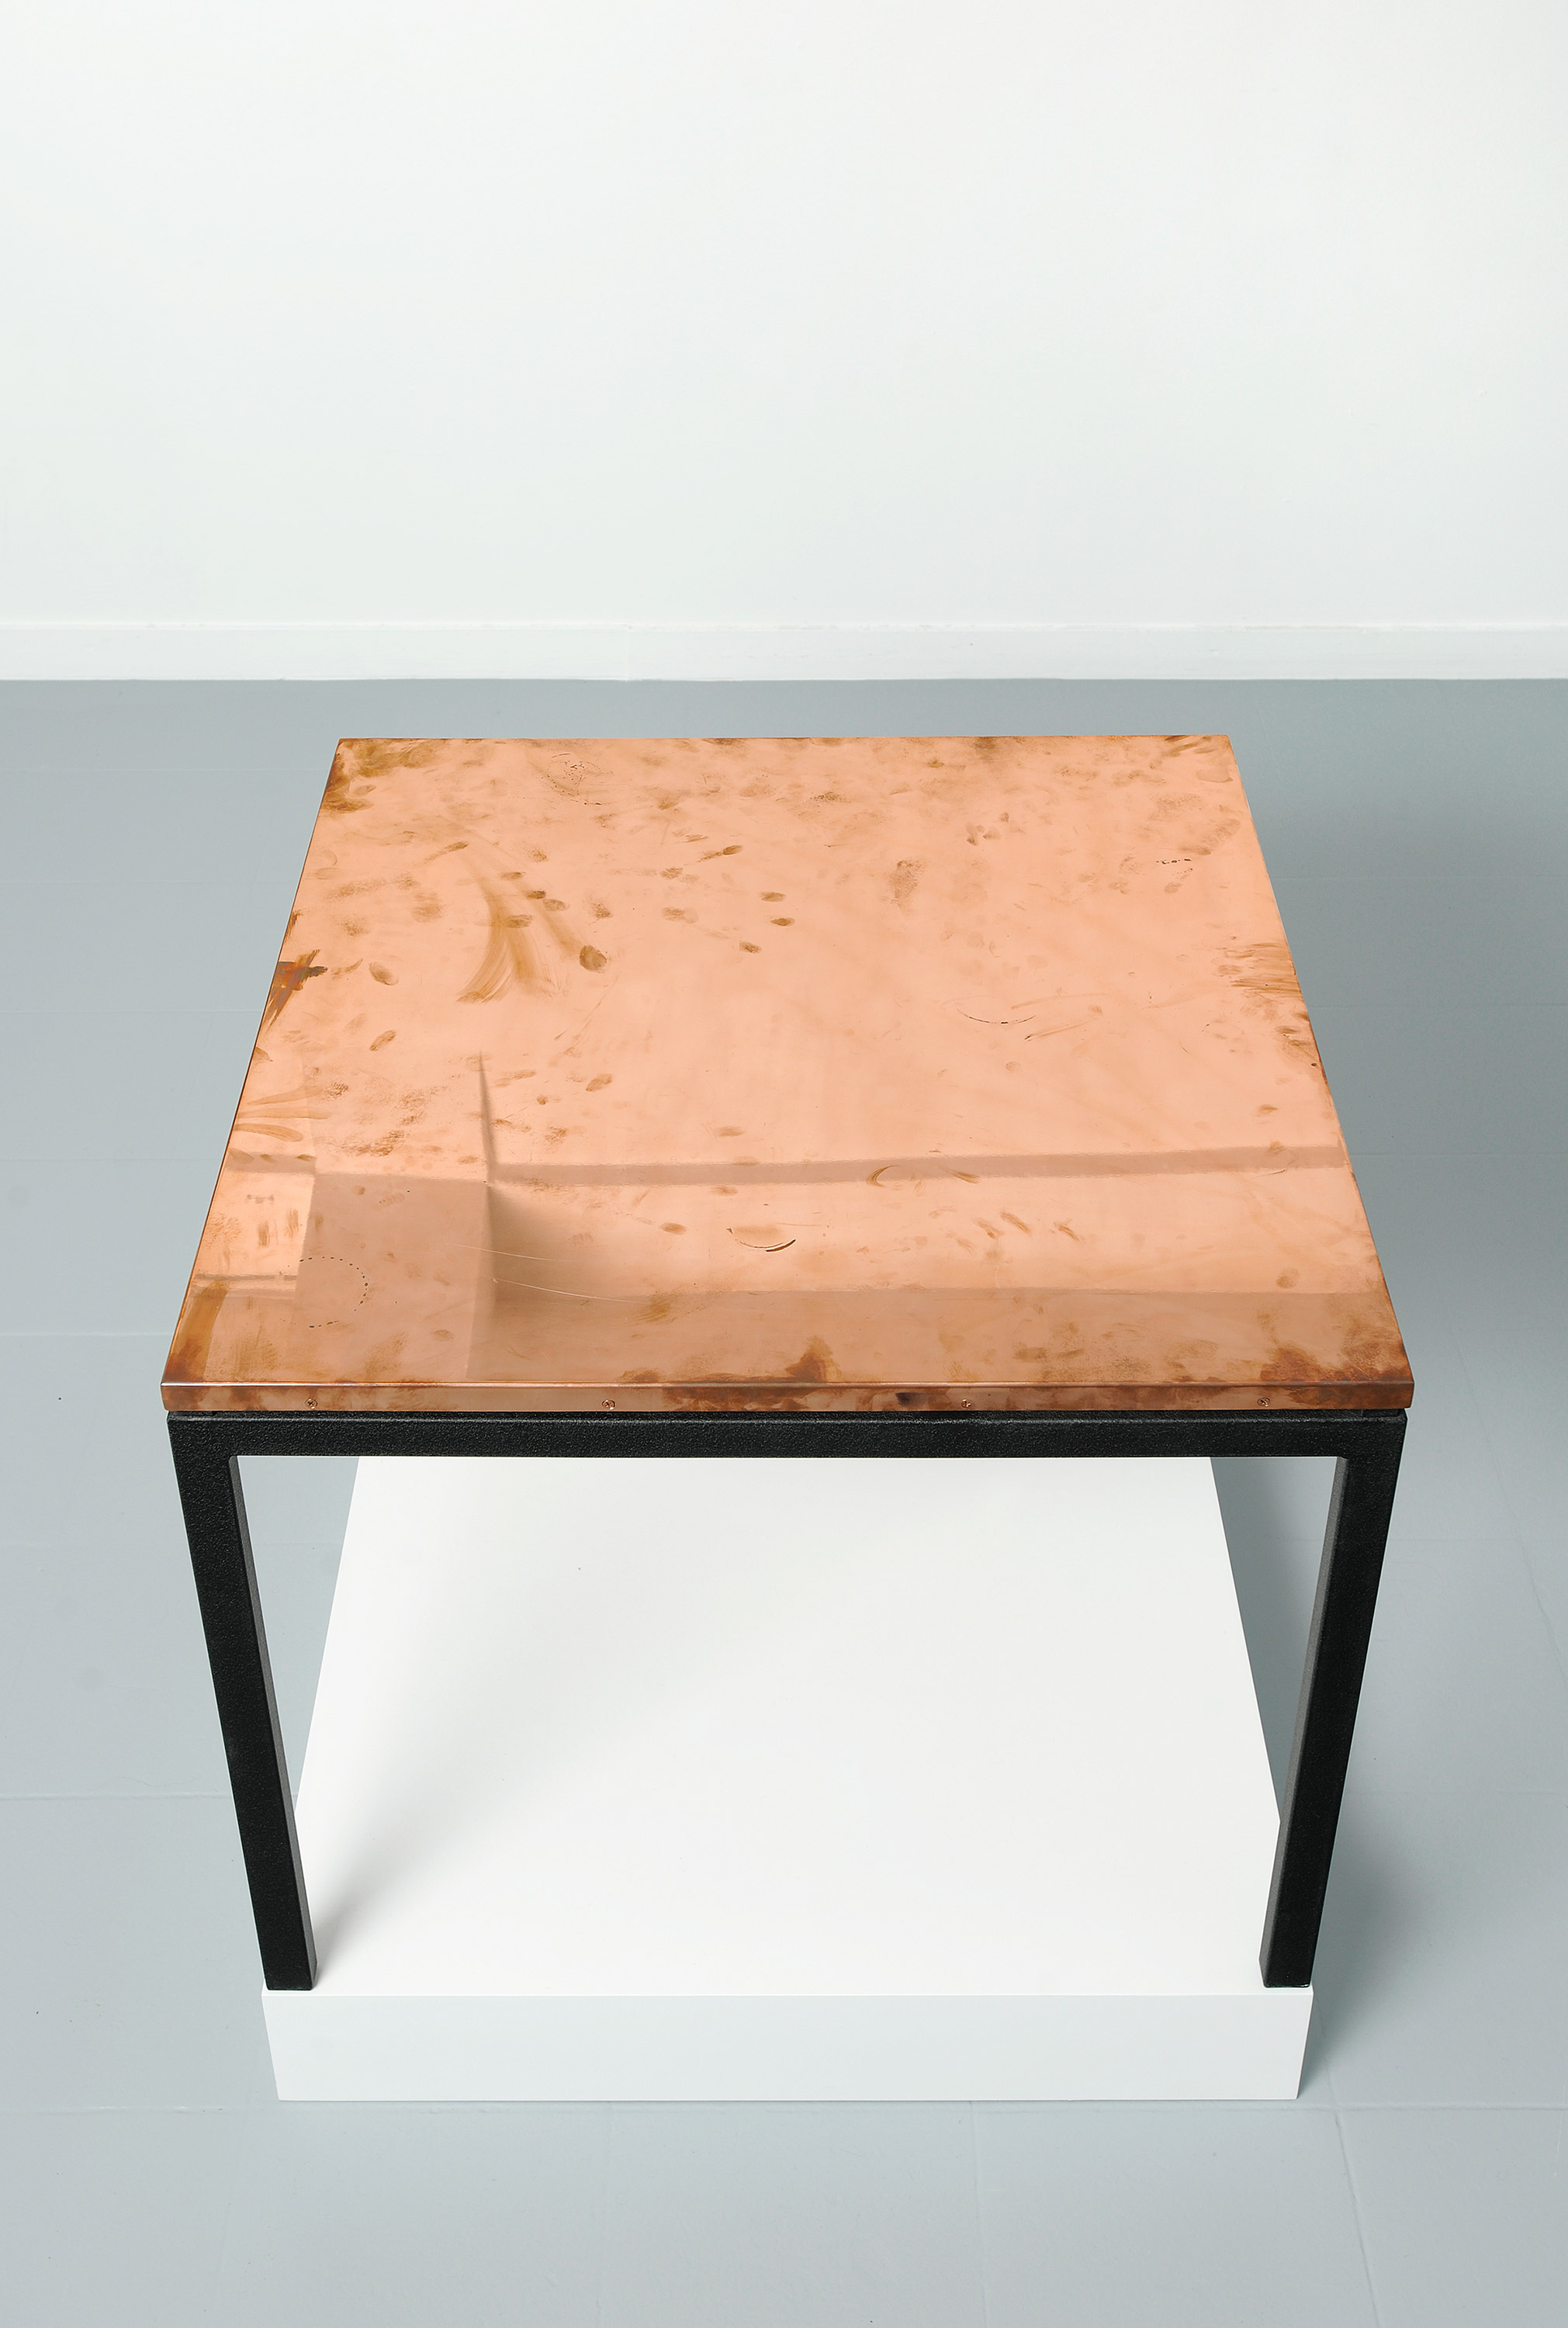   Copper Surrogate (Table: designed by Charlotte Perriand and Le Corbusier, 1959; Galerie Rodolphe Janssen, Brussels, Belgium, August 10th–September 2nd, 2011)   2011  Polished copper table top and powder-coat steel  Table: 33 5/8 x 33 5/8 x 1 inches